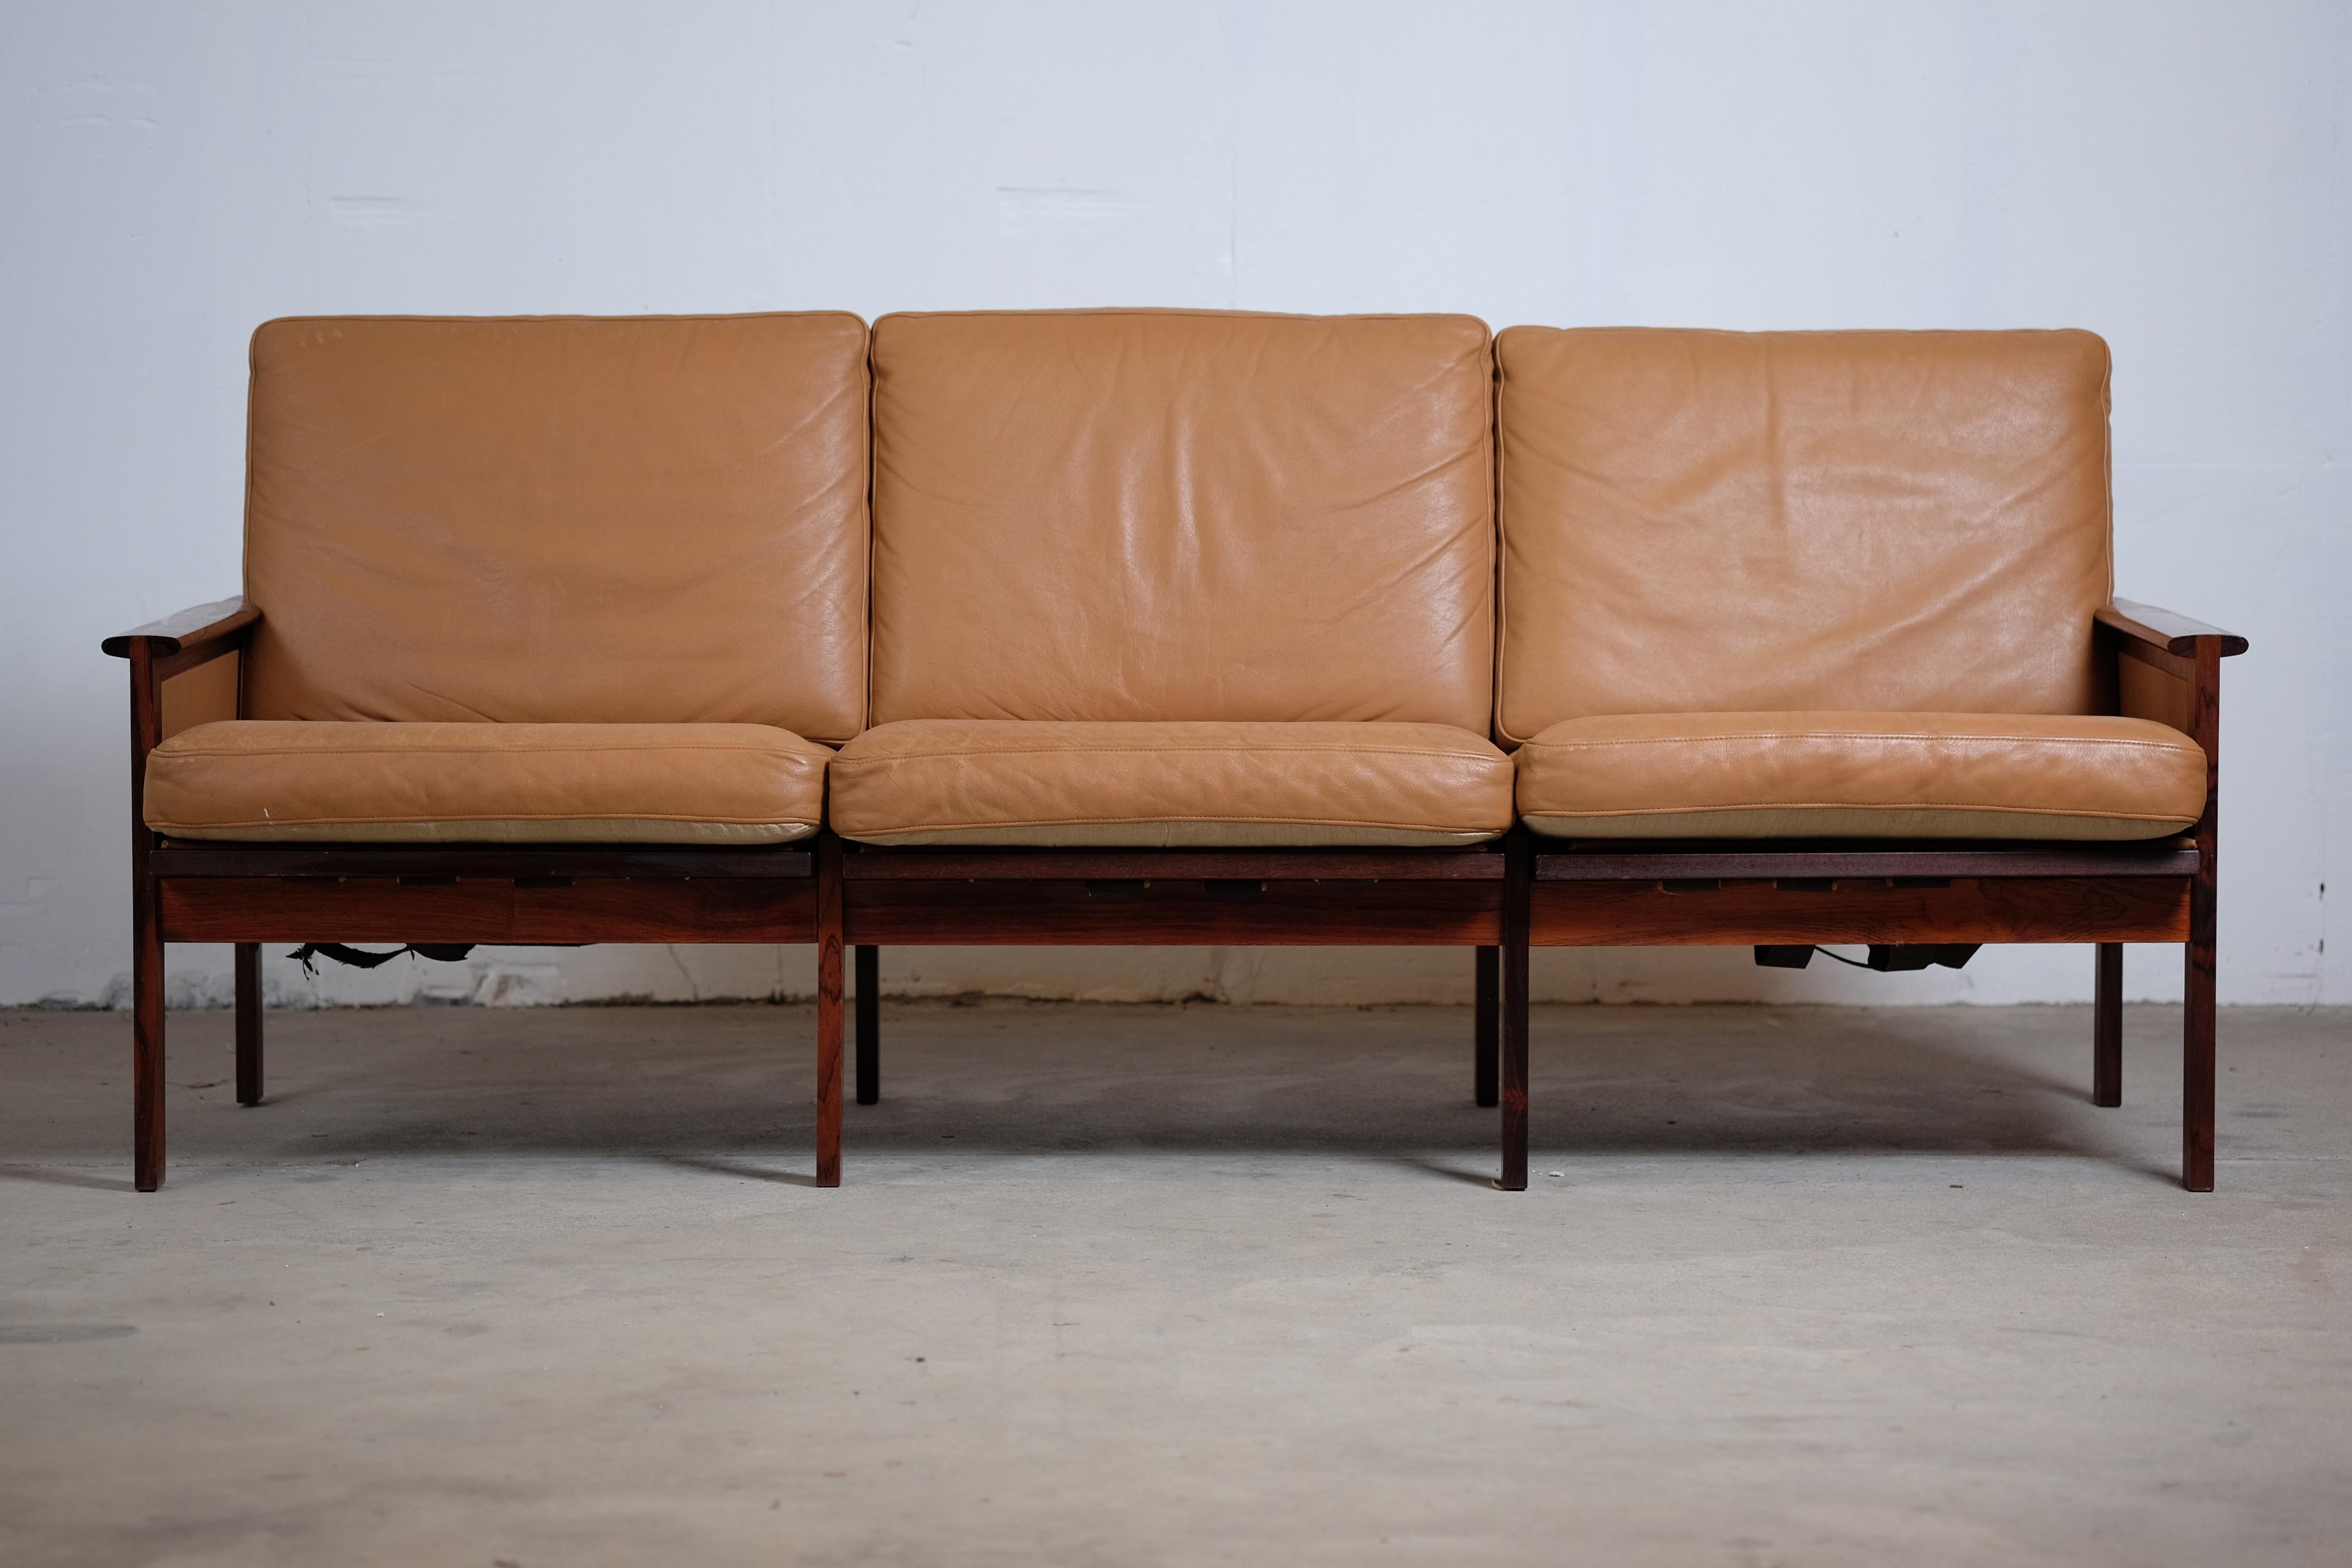 This beautiful rosewood sofa was designed by Illum Wikkelsø and manufactured by N. Eilersen. This sofa also comes in a two-seat and there has also been made a easy chair in that series. The leather cushions are in good vintage condition with a great